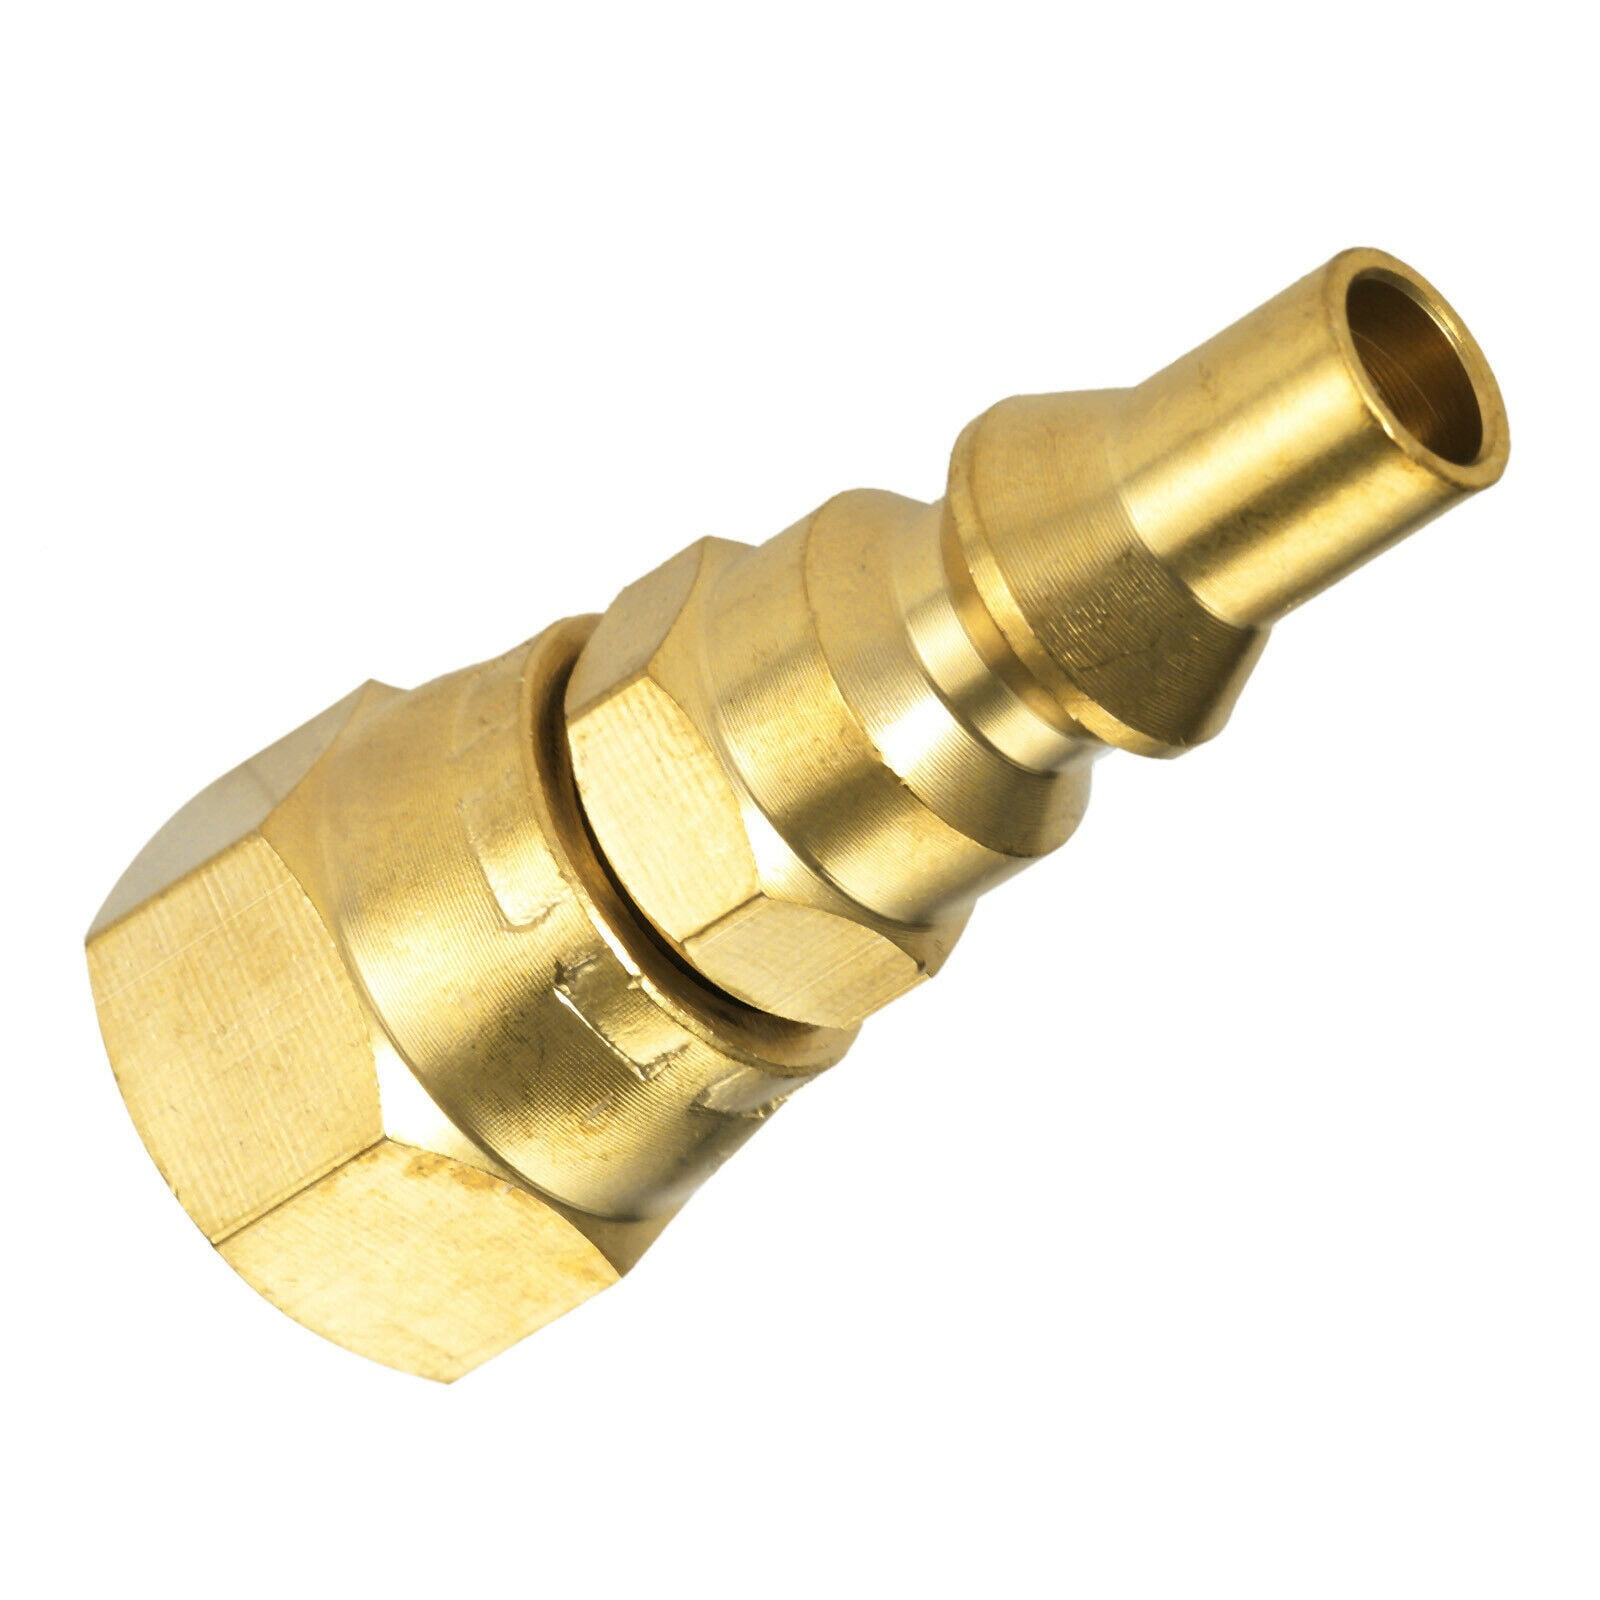 F Fityle Brass Propane Quick Connect Fitting Adapter 10mm/0.39inch Male Thread Connect for RV Portable BBQ Grill 